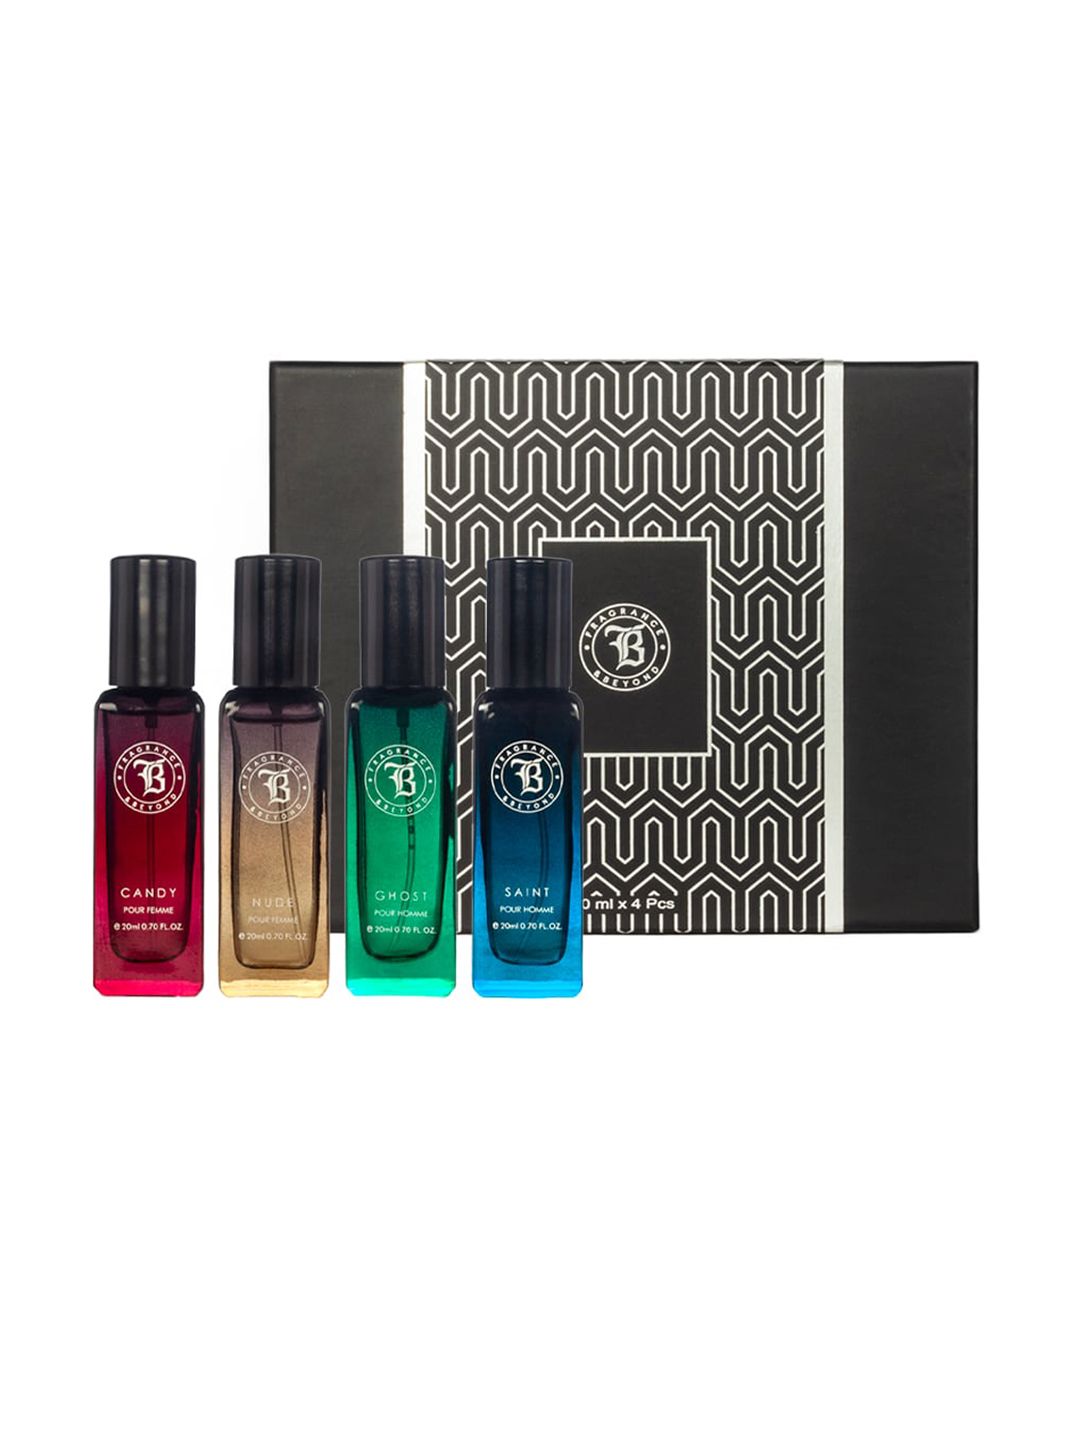 Fragrance & Beyond Set of 4 Perfume - Candy + Nude + Ghost + Saint - 20 ml Each Price in India